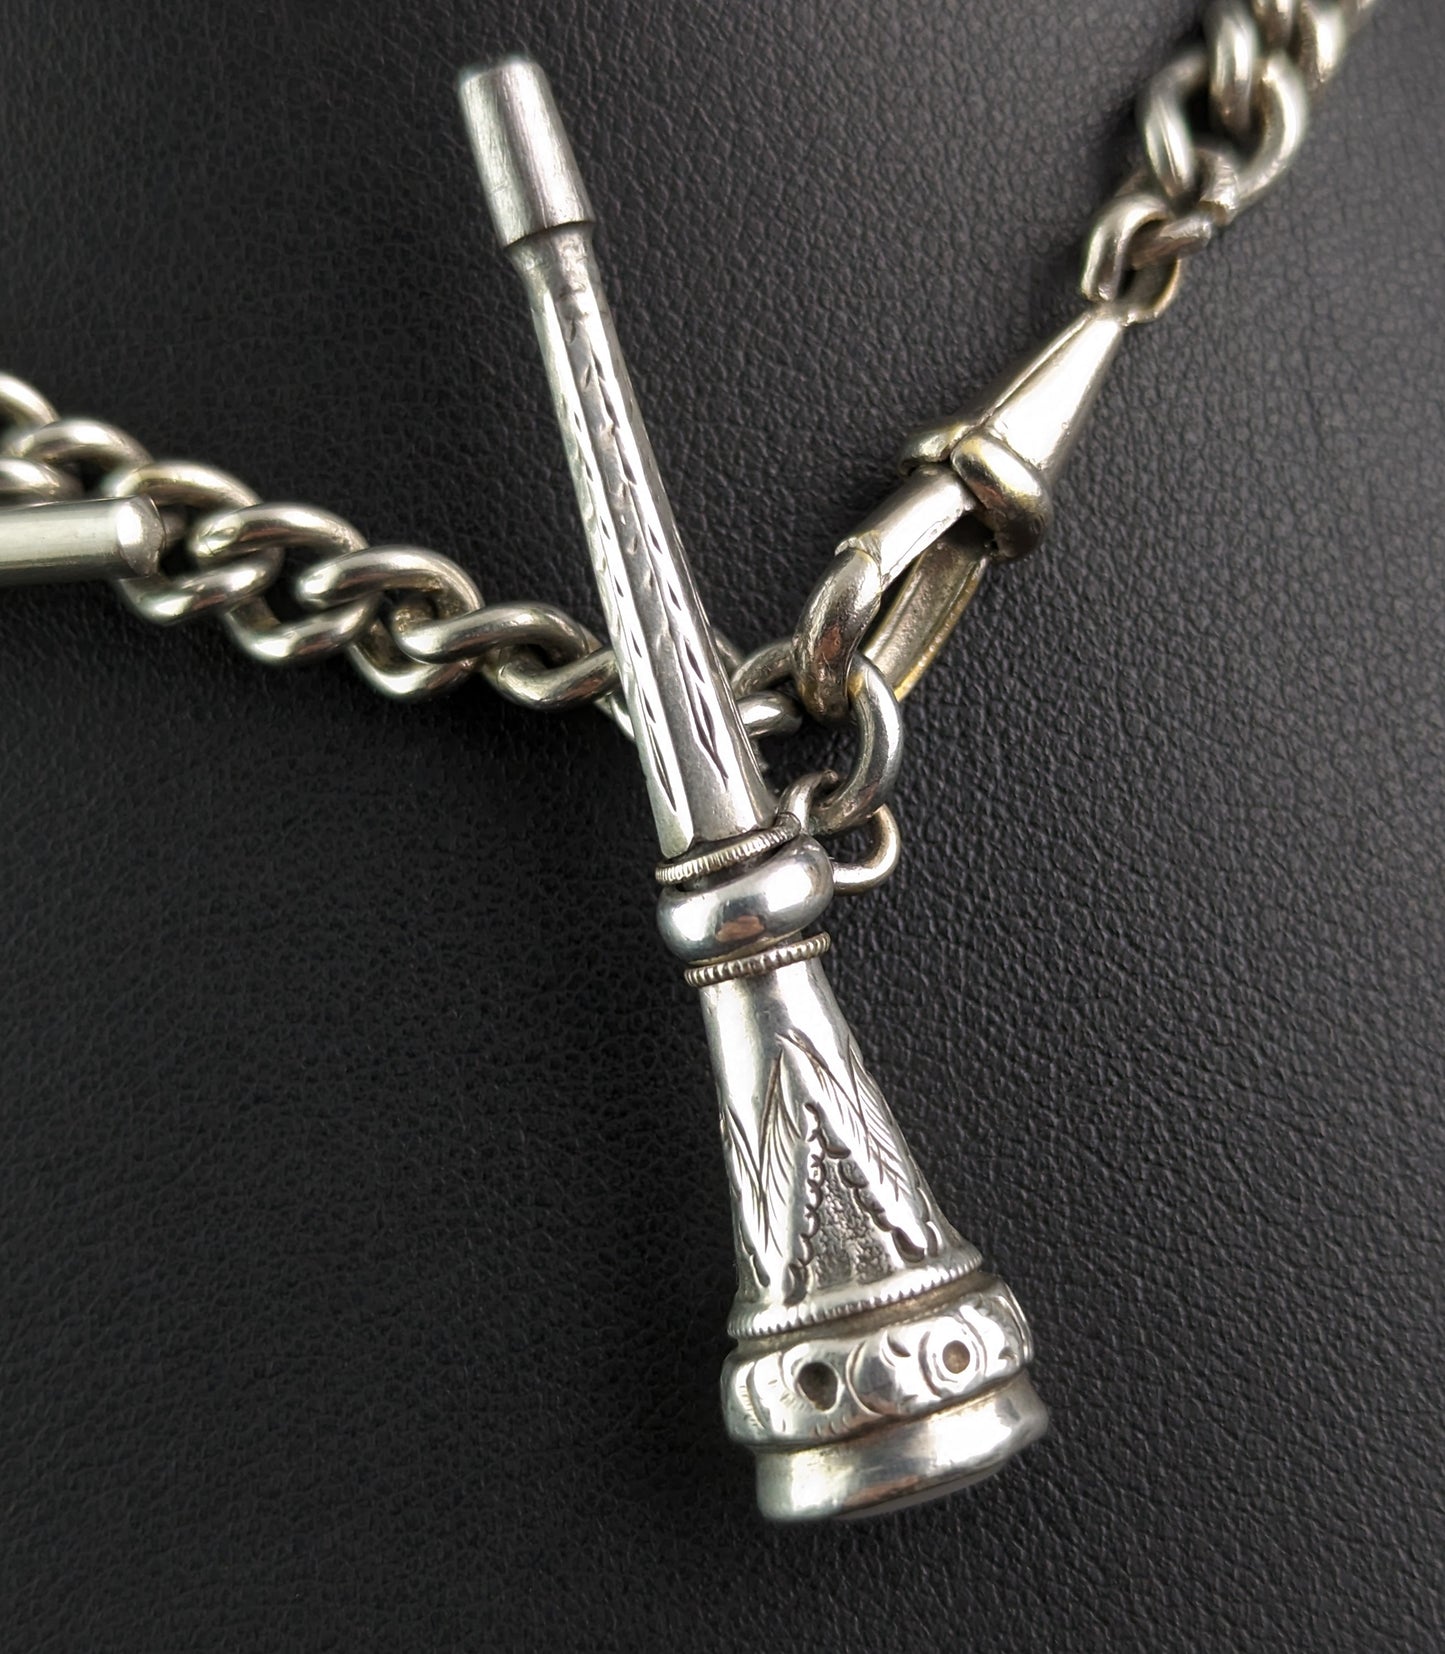 Antique Edwardian sterling silver Albert chain, propelling pencil fob